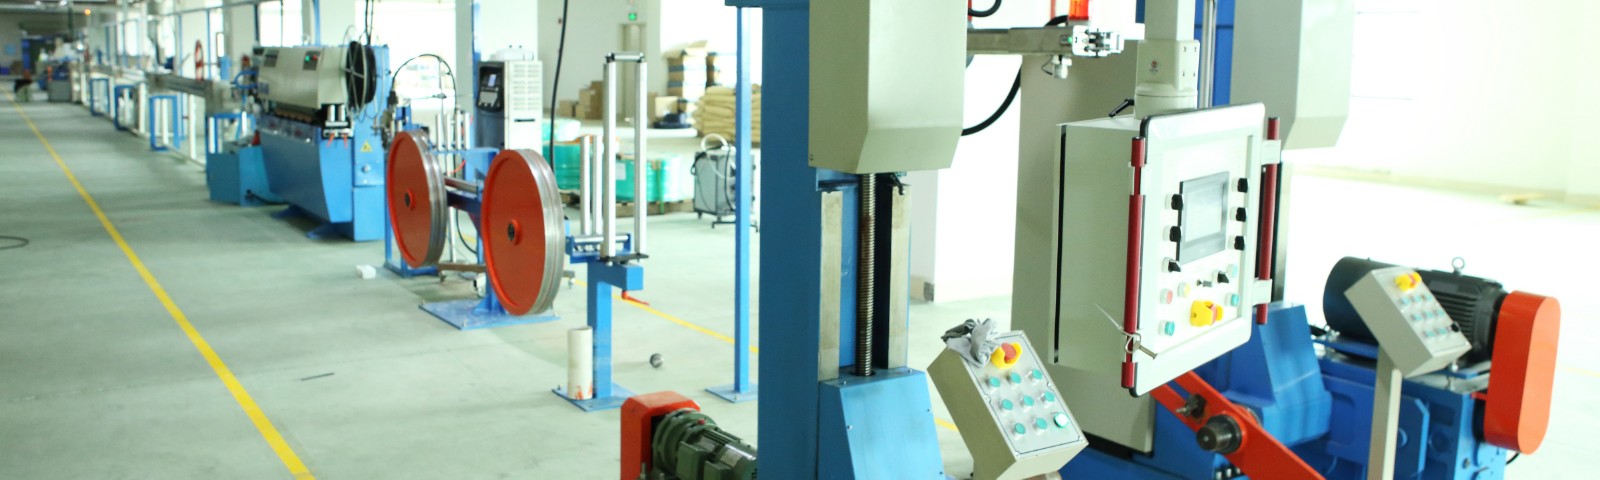 outdoor optical cable sheathing line.jpg